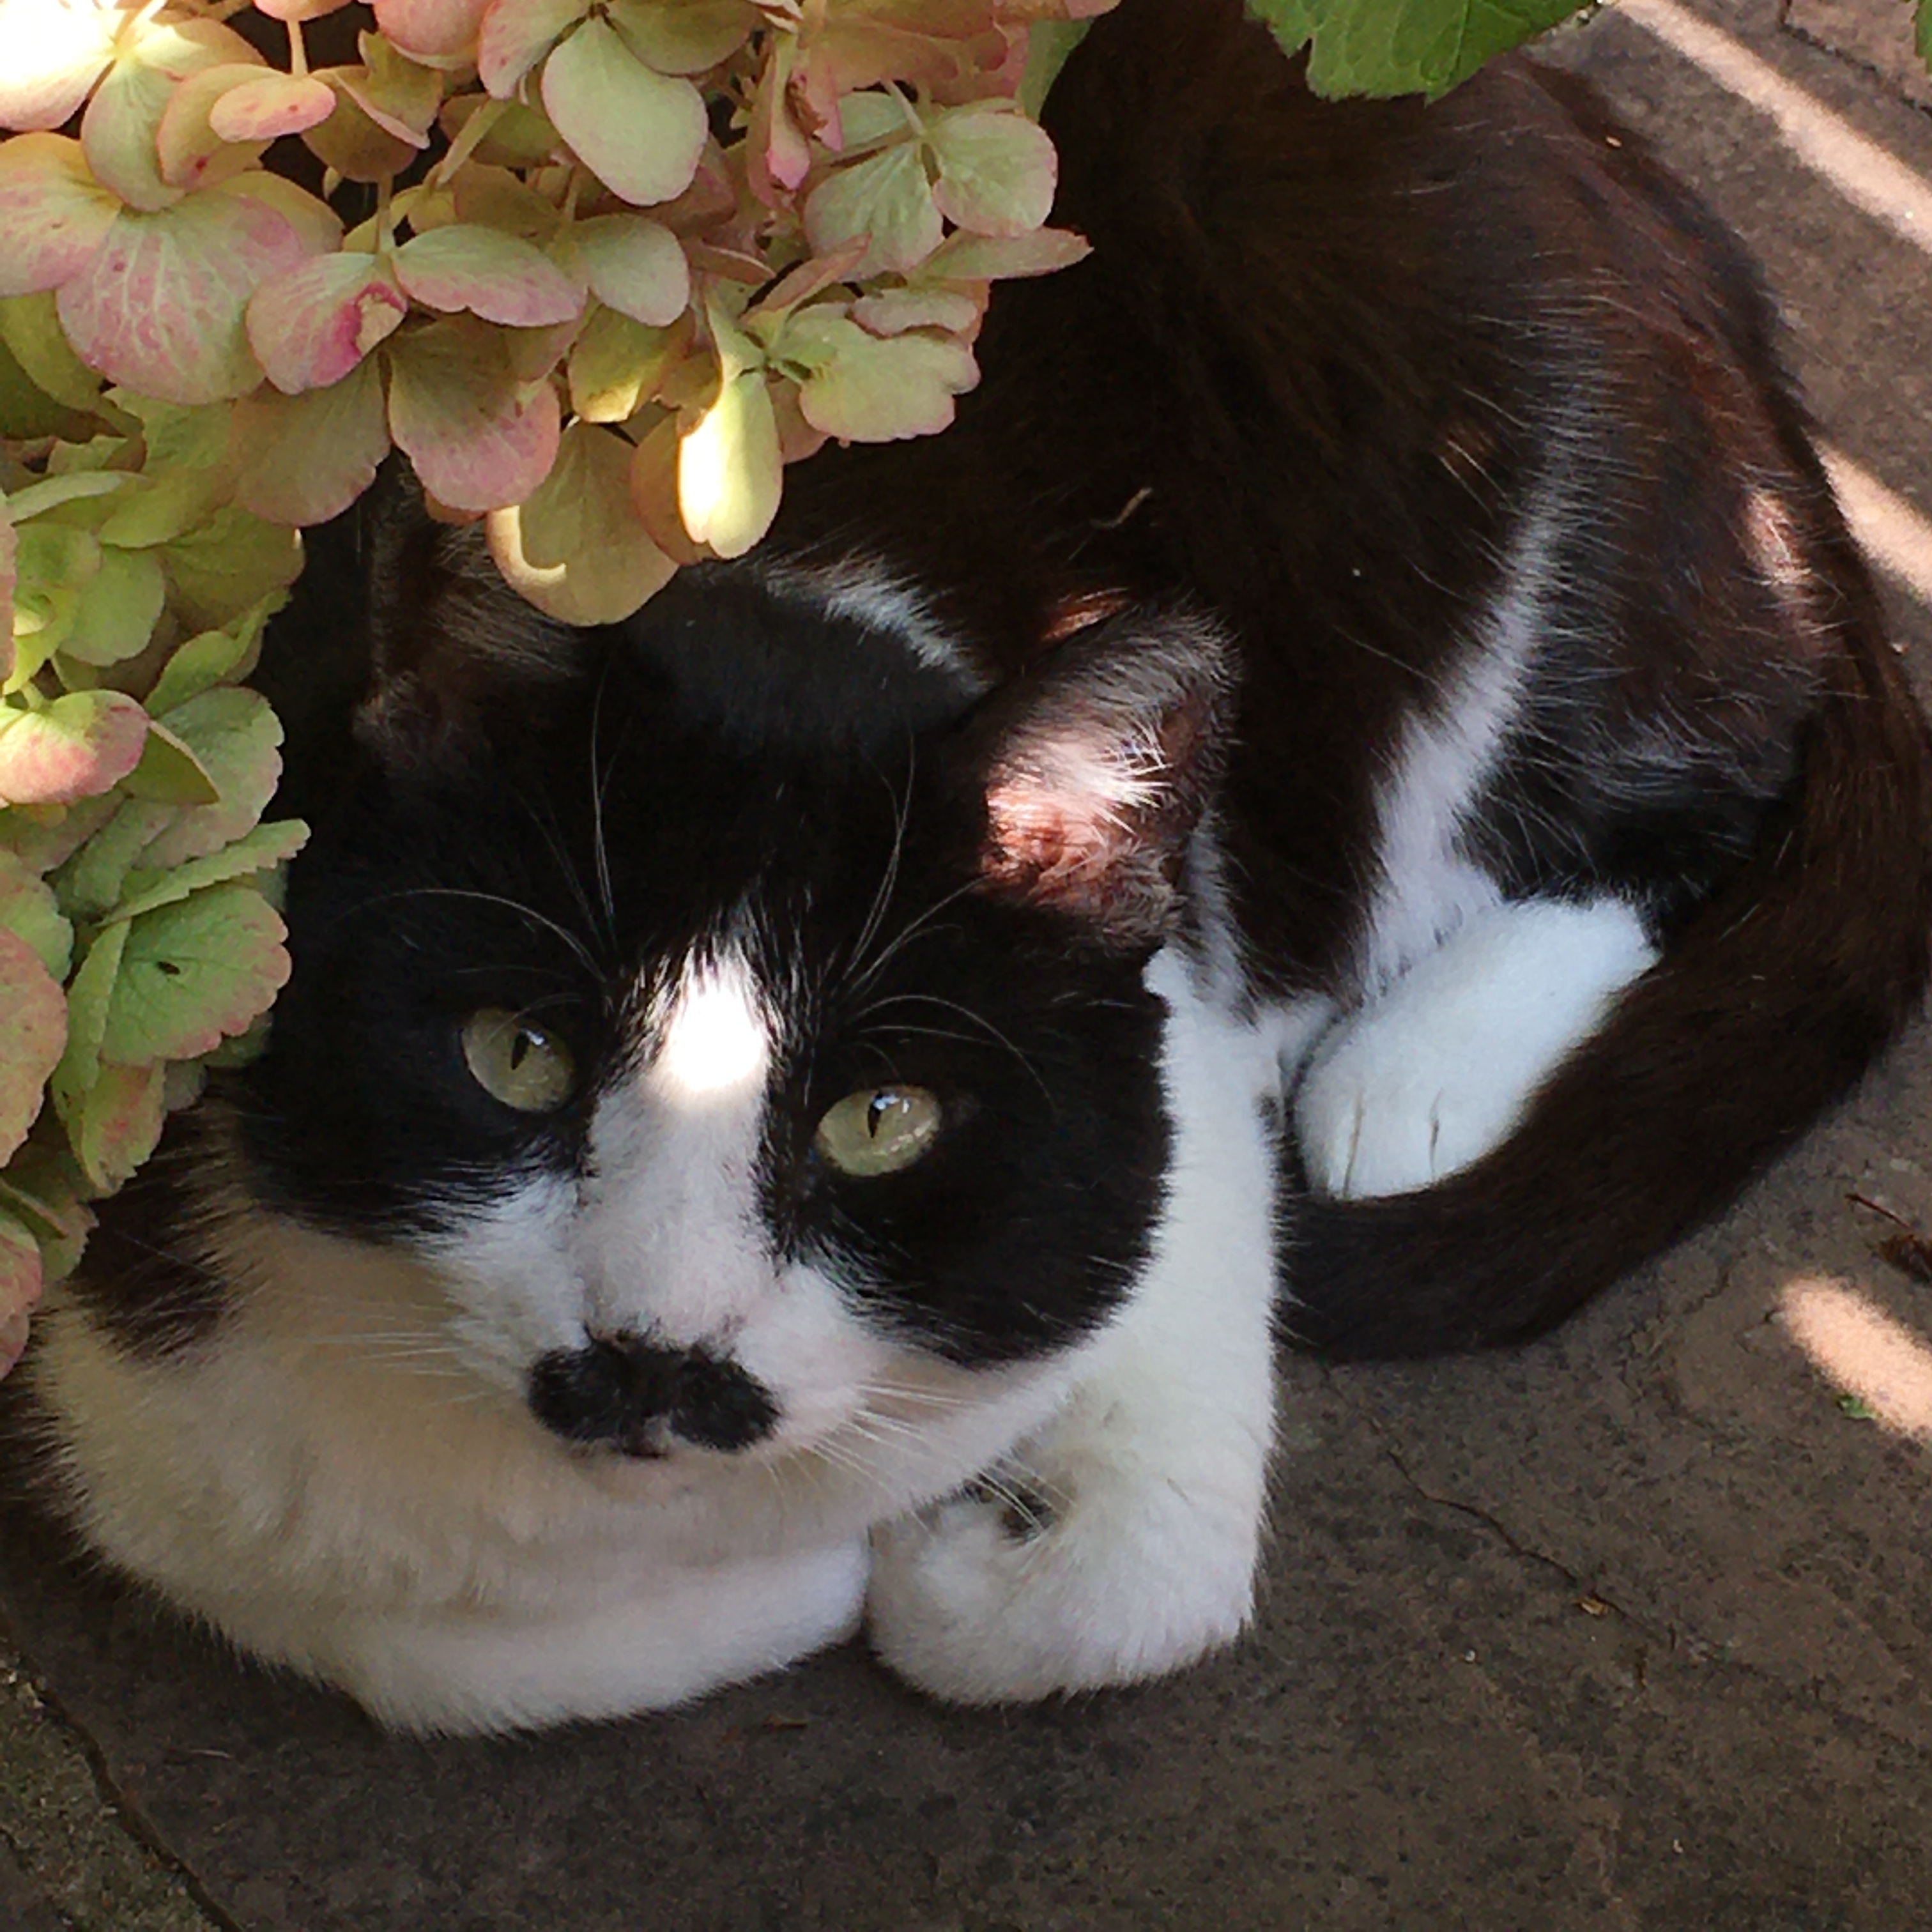 A chubby black and white cat with green eyes and a special moustache is posing with his paws tucked in next to a hydrangea.